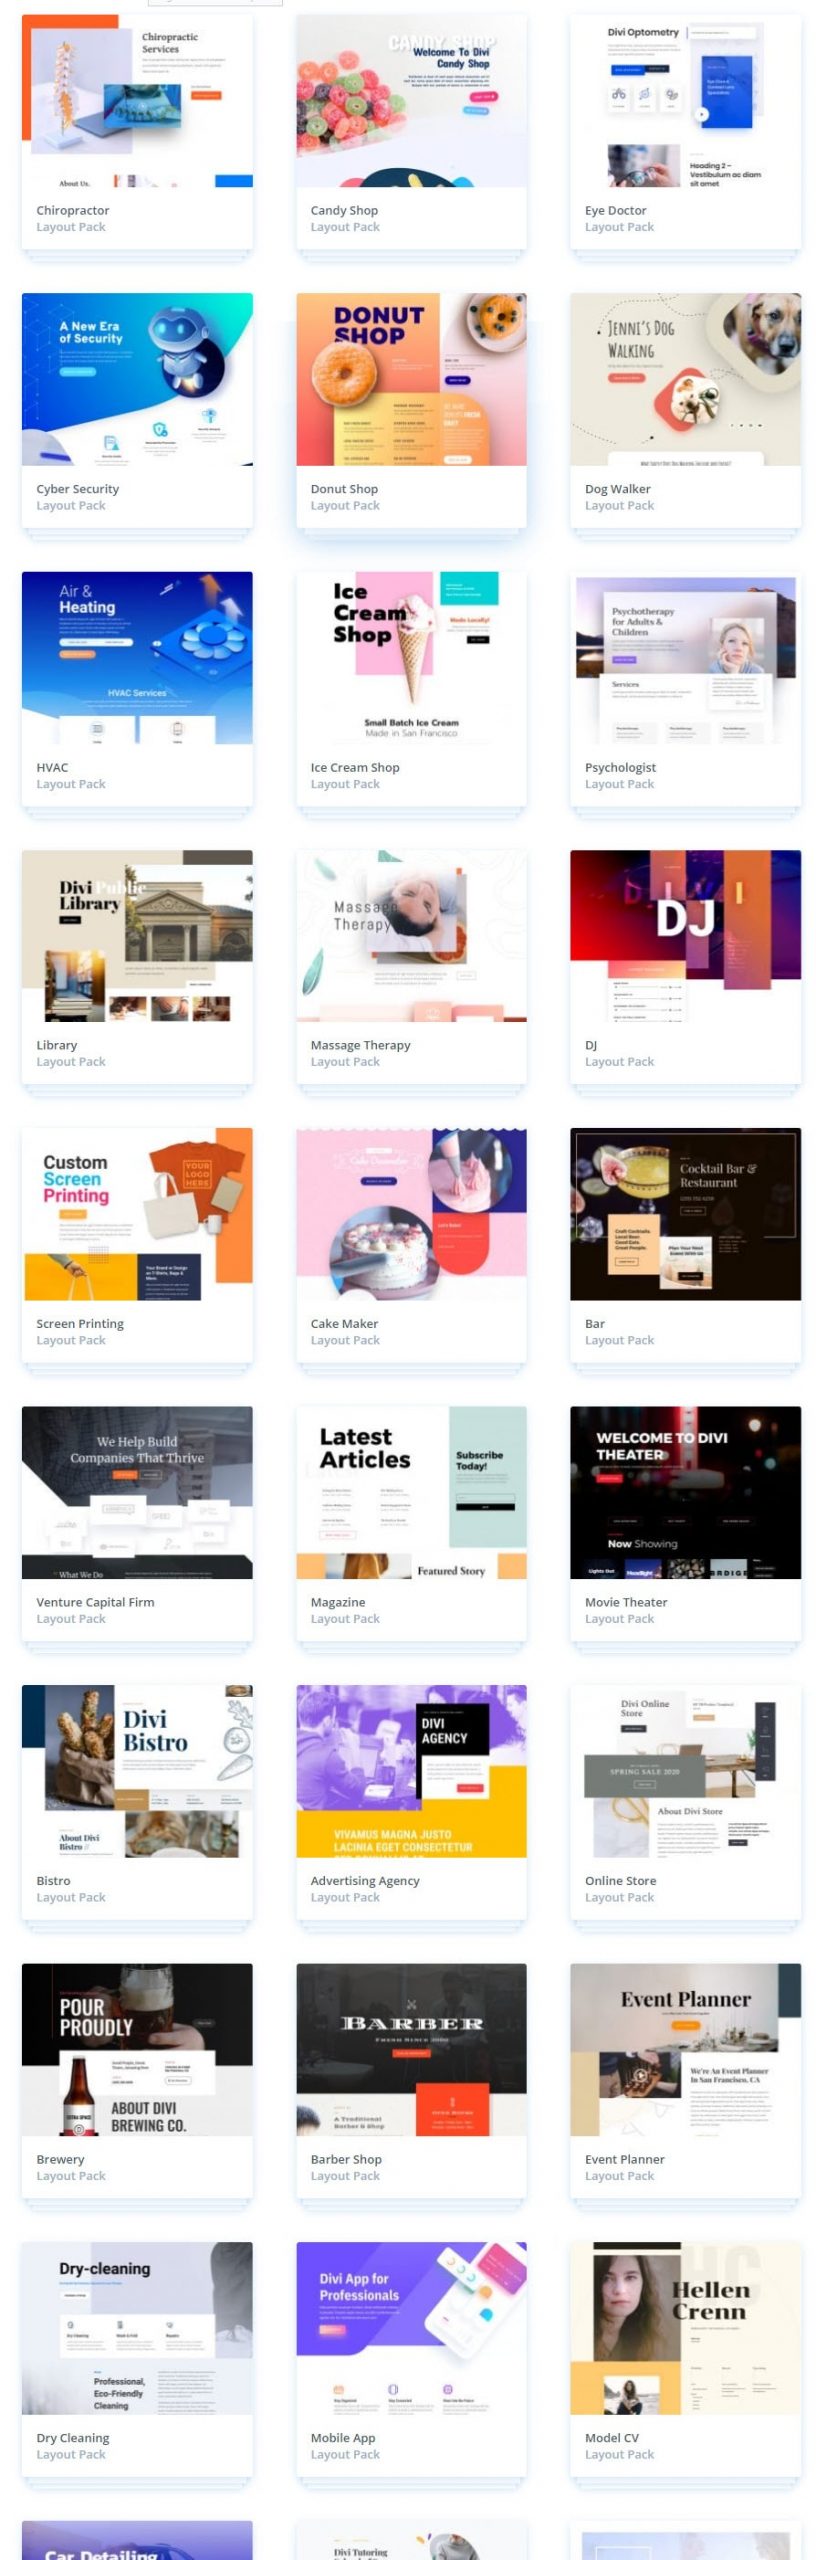 various Divi layouts you can use